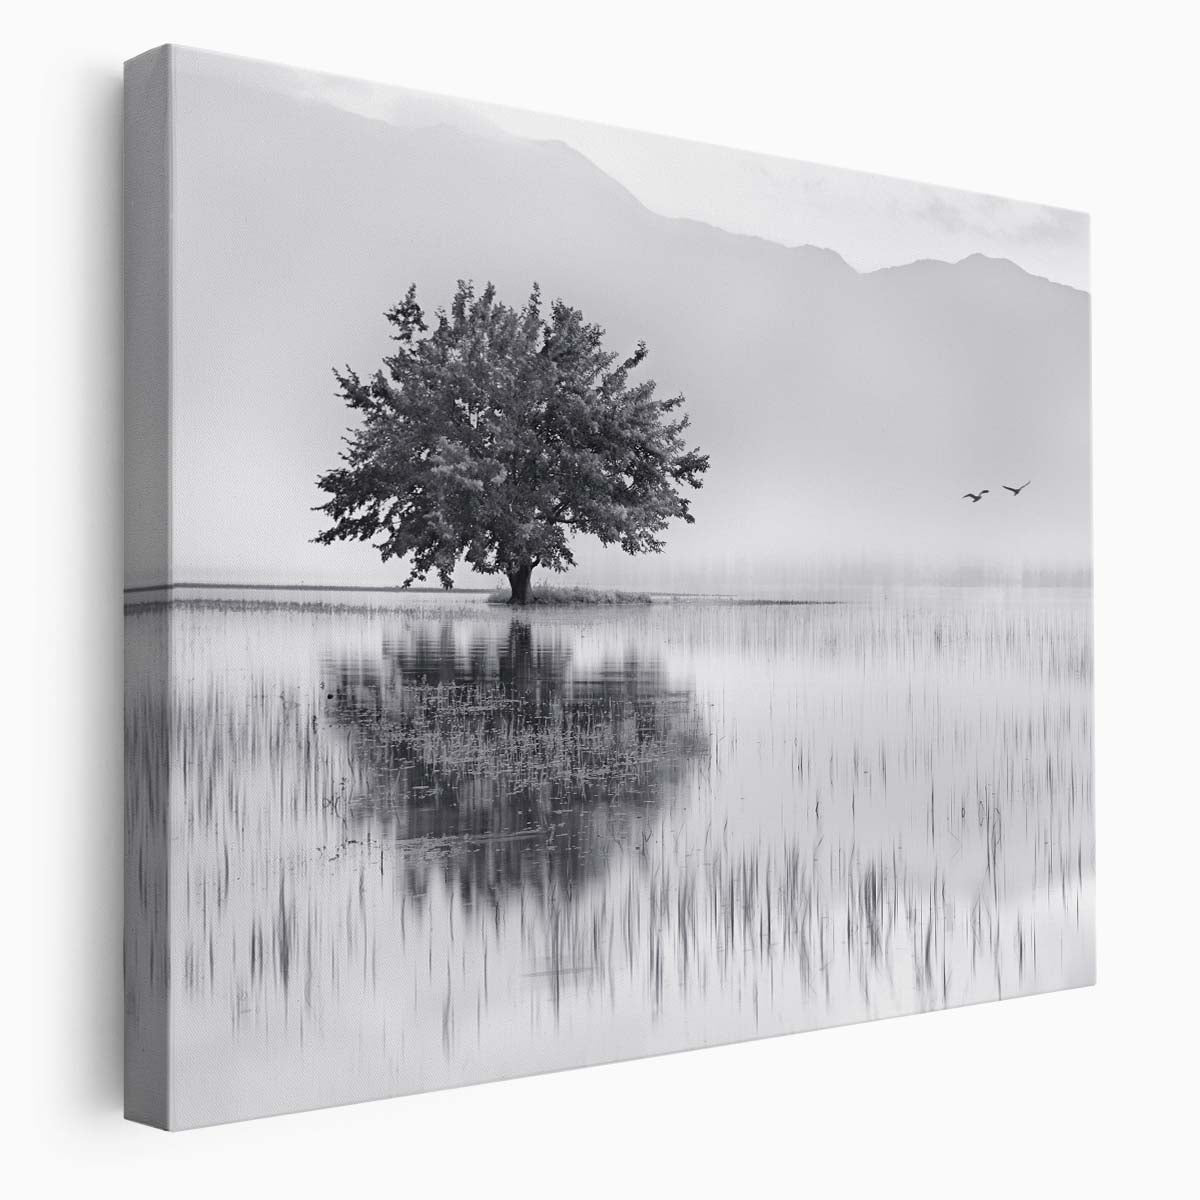 Minimalist Spring Lake & Trees Reflection Wall Art by Luxuriance Designs. Made in USA.